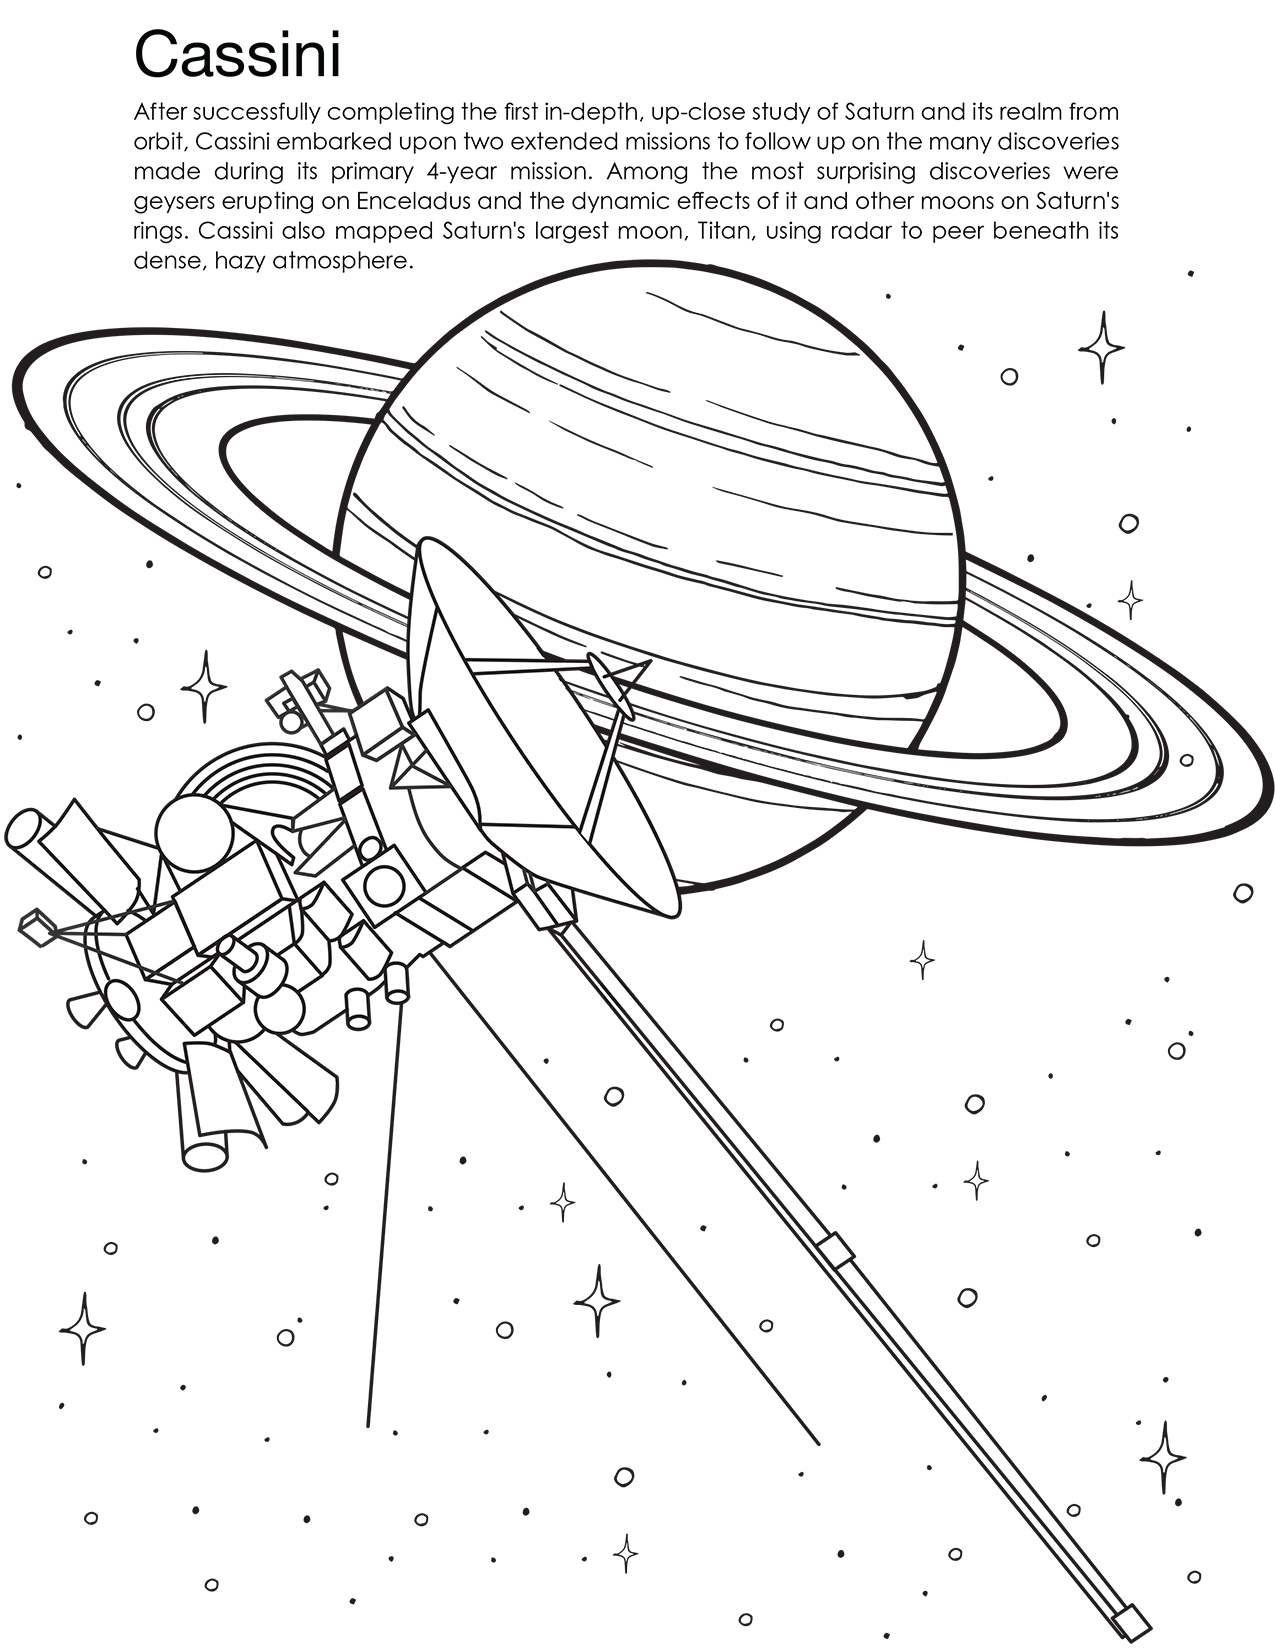 Coloring page for Cassini.